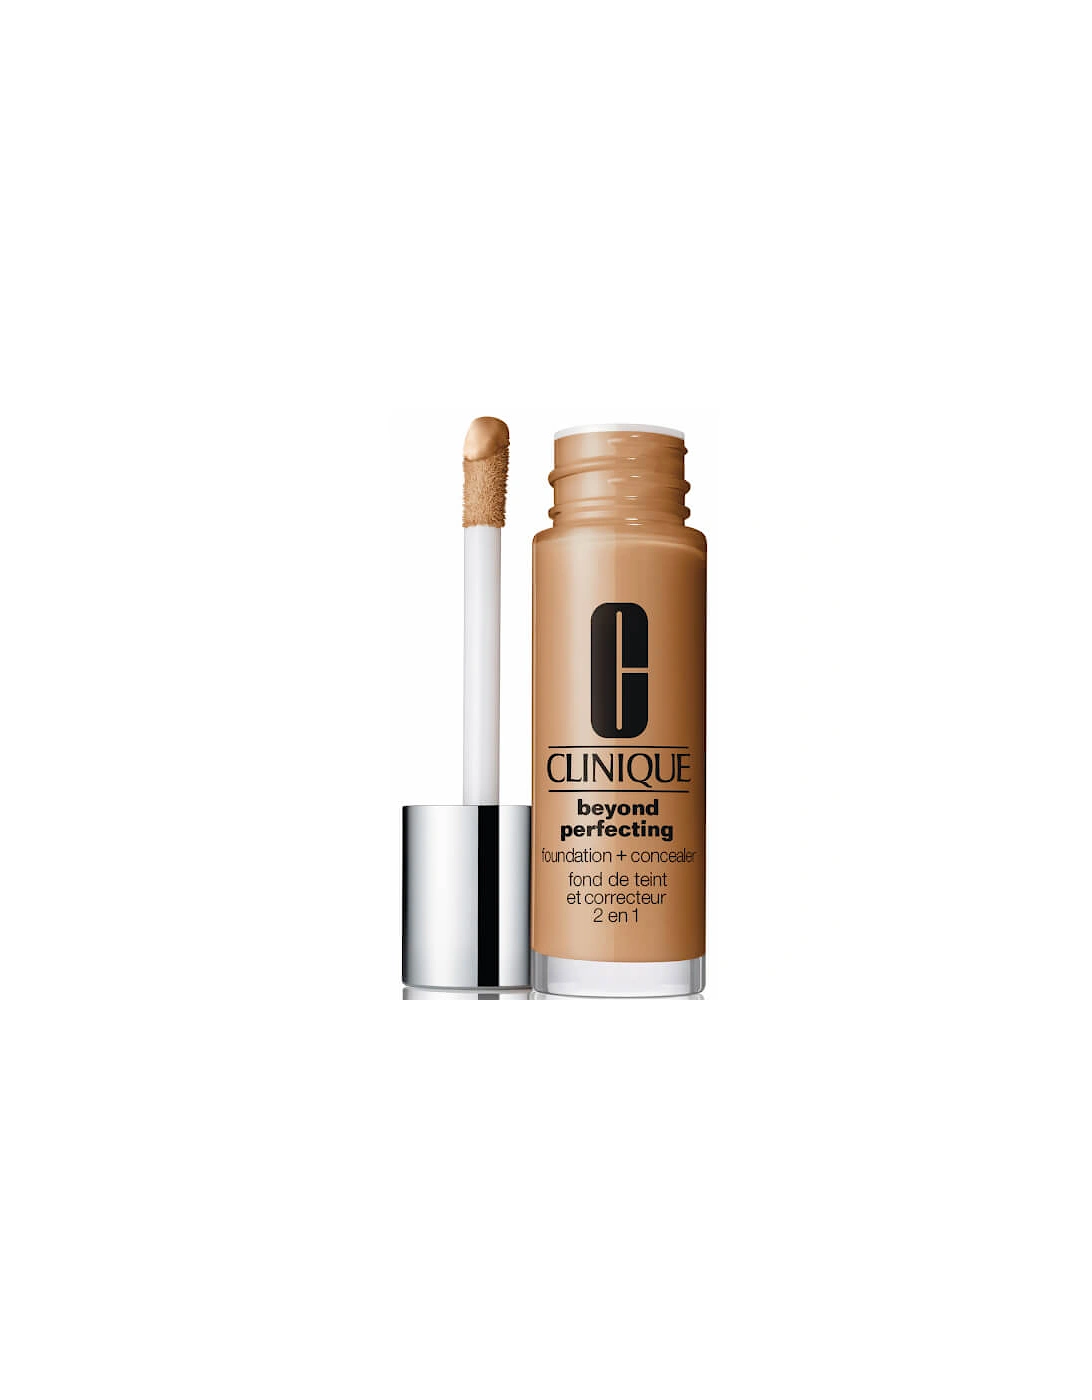 Beyond Perfecting Foundation and Concealer Cream Caramel, 2 of 1